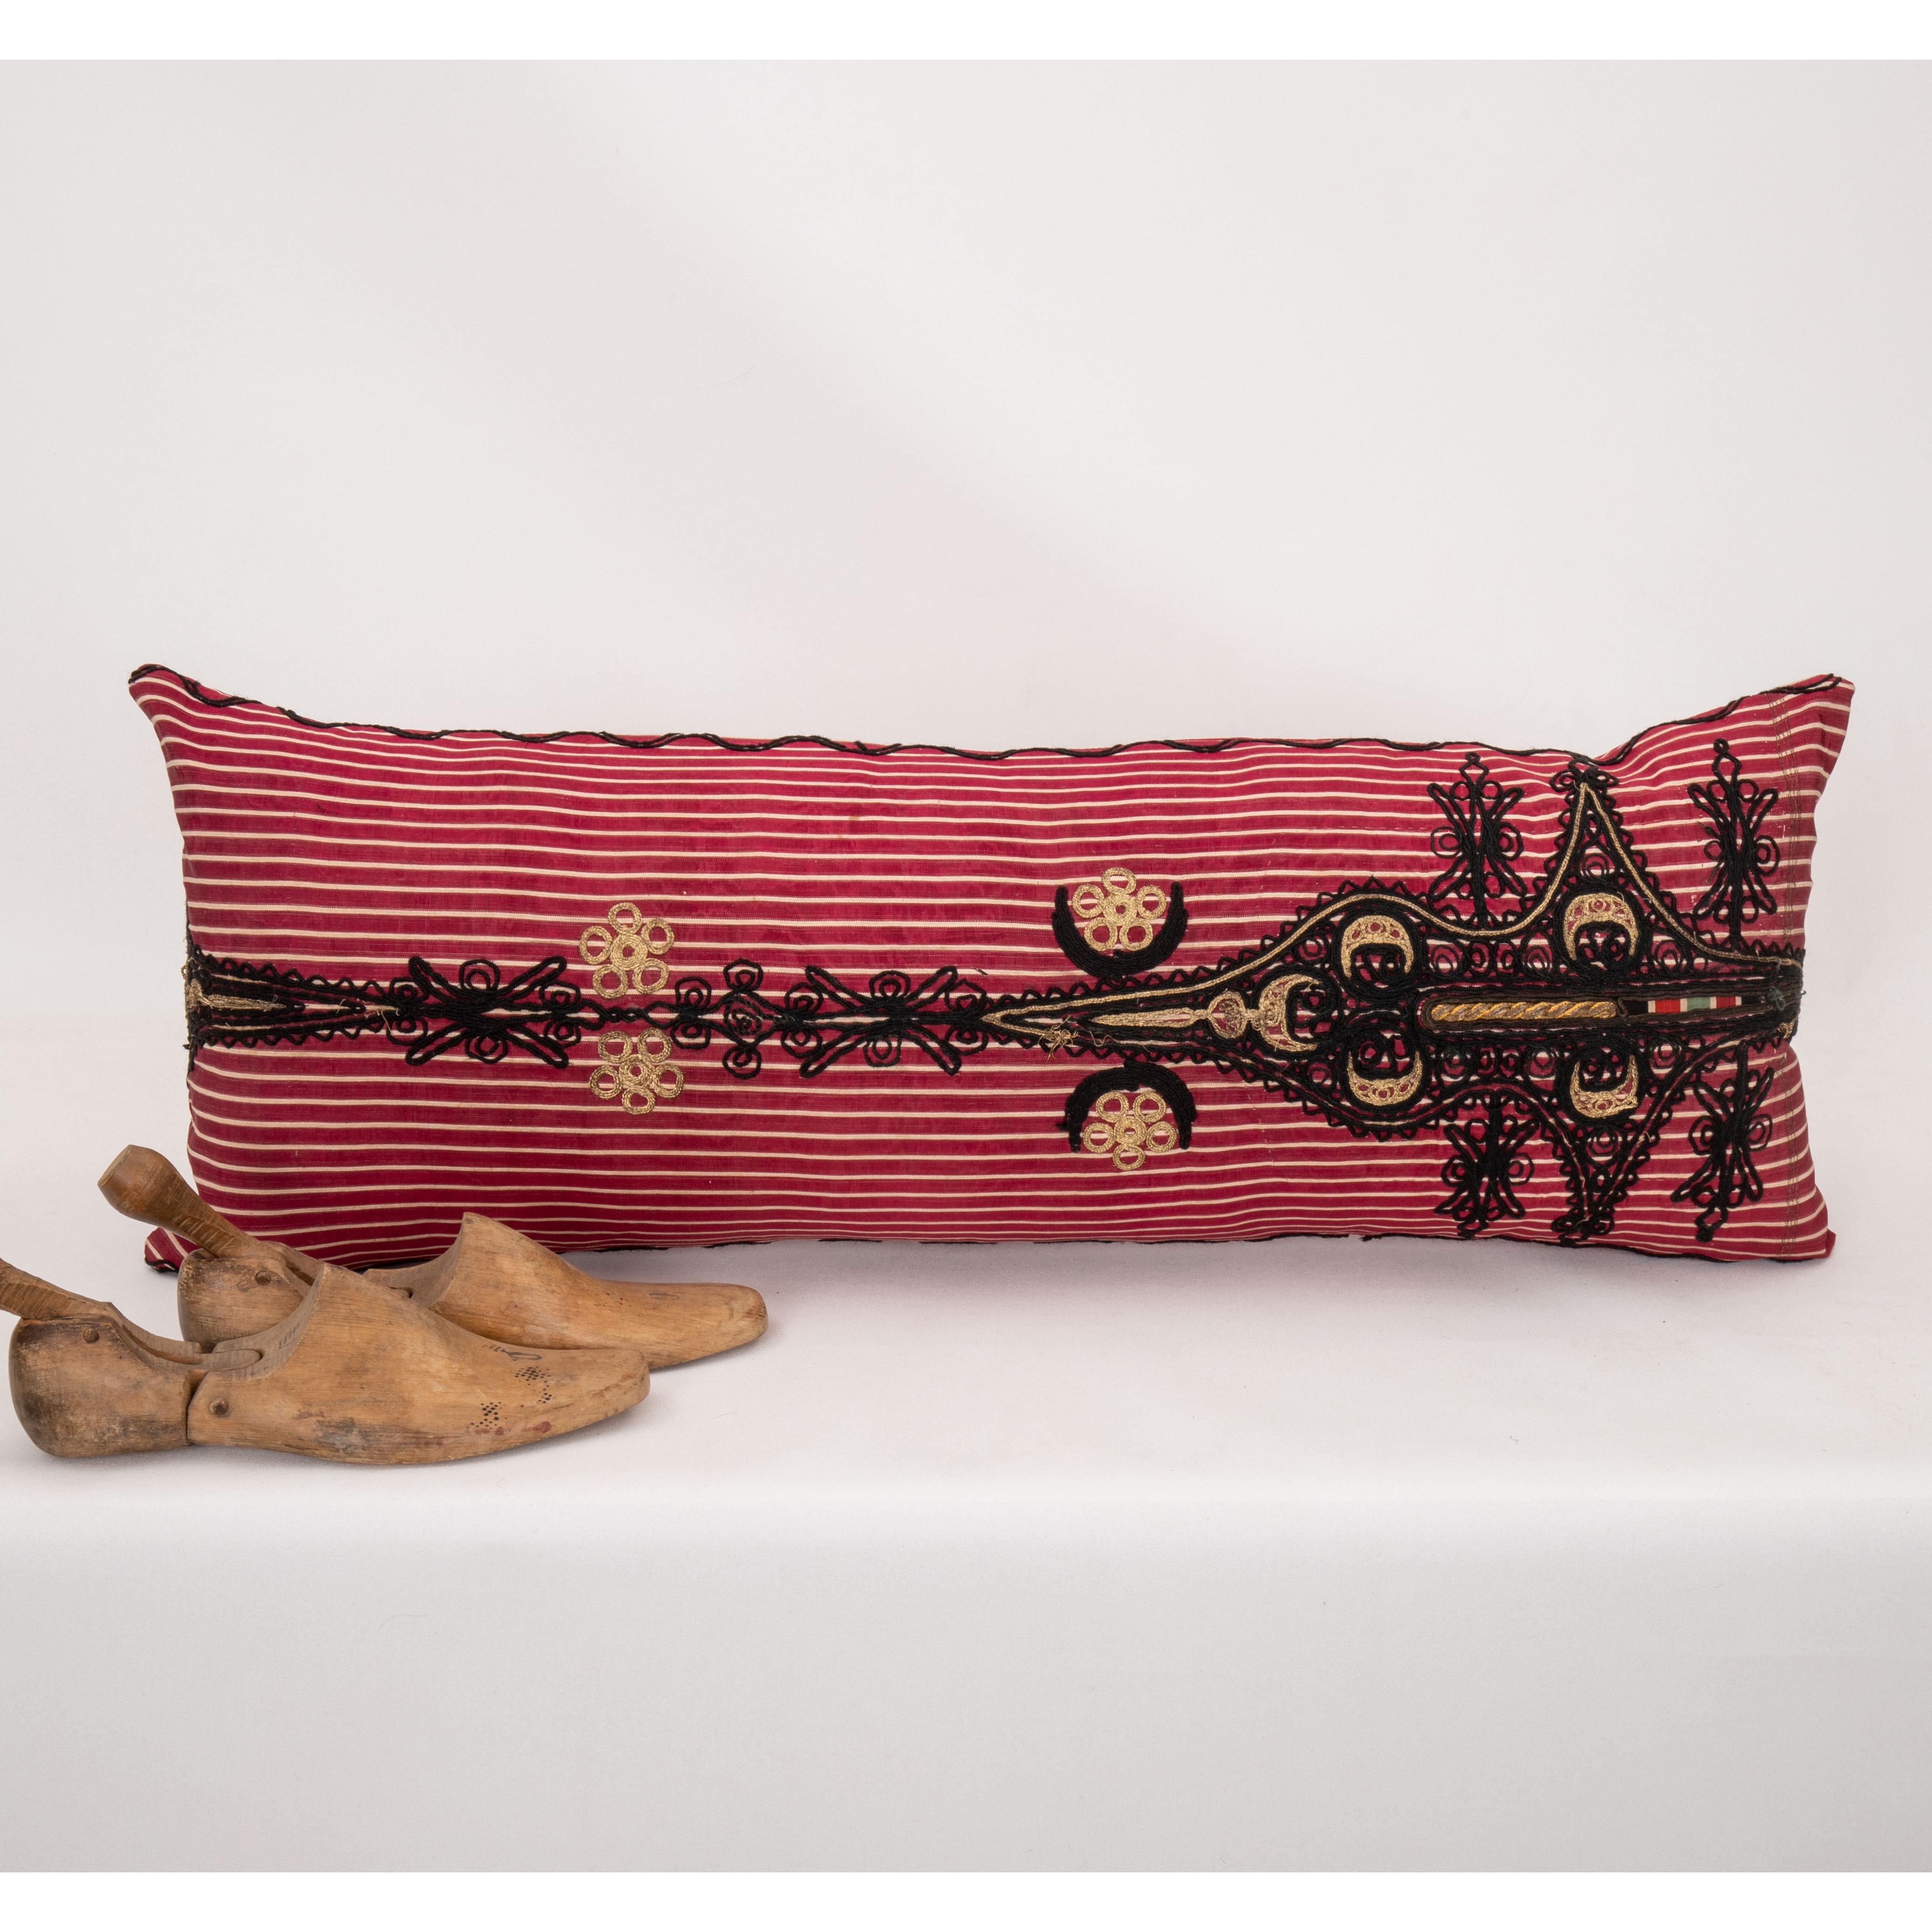 20th Century Antique Ottoman Turkish Pillow Case, Early 20th C. For Sale